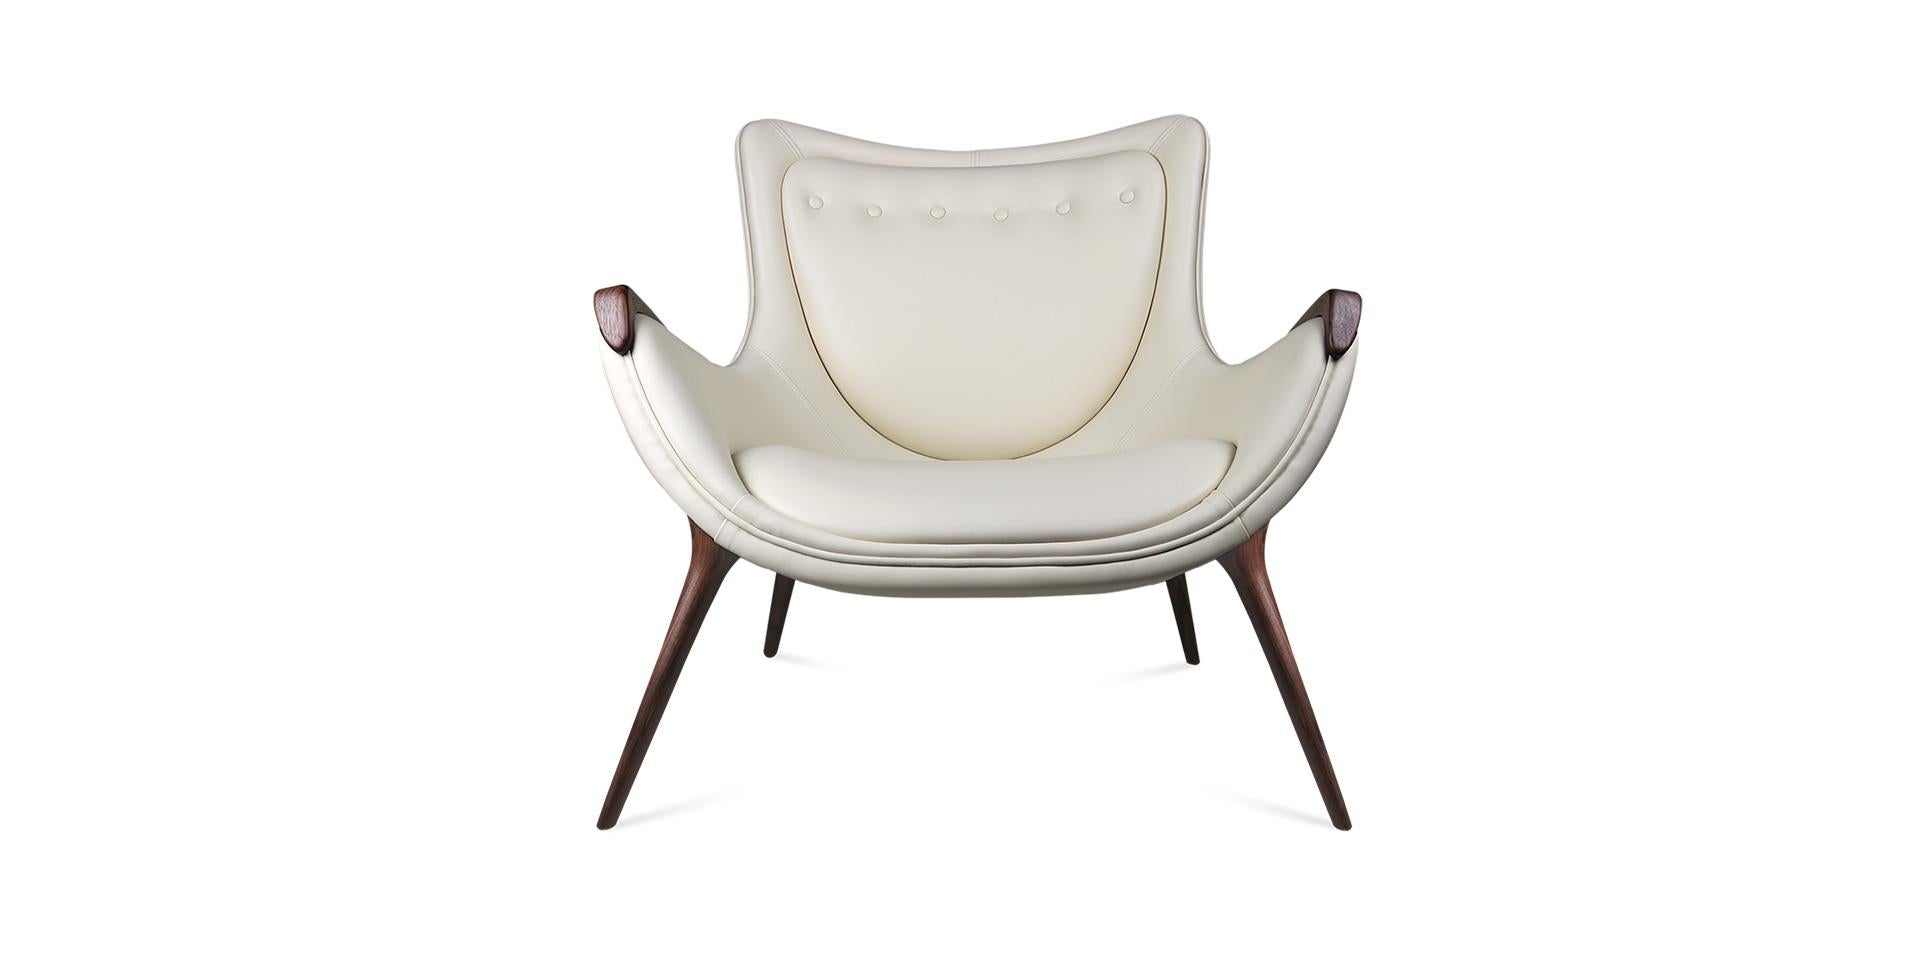 This contemporary armchair fit with a mid-century interior design style.
